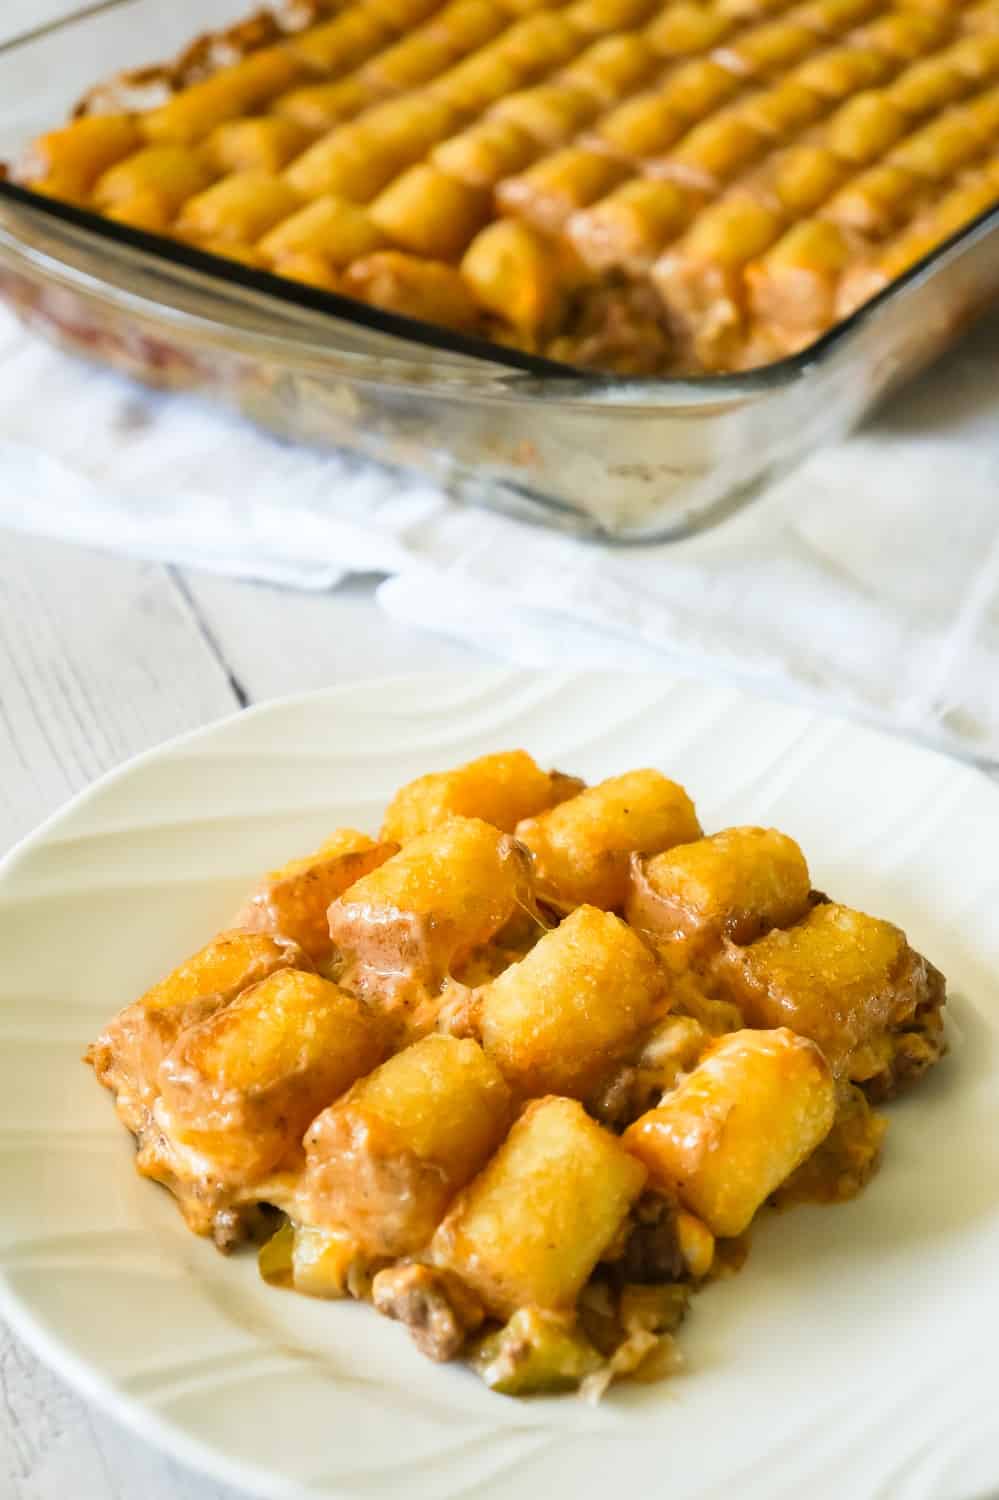 Hamburger Casserole with Tater Tots is an easy ground beef casserole recipe made with cream of mushroom soup, diced dill pickles and diced tomatoes, all topped with cheese and potatoes.